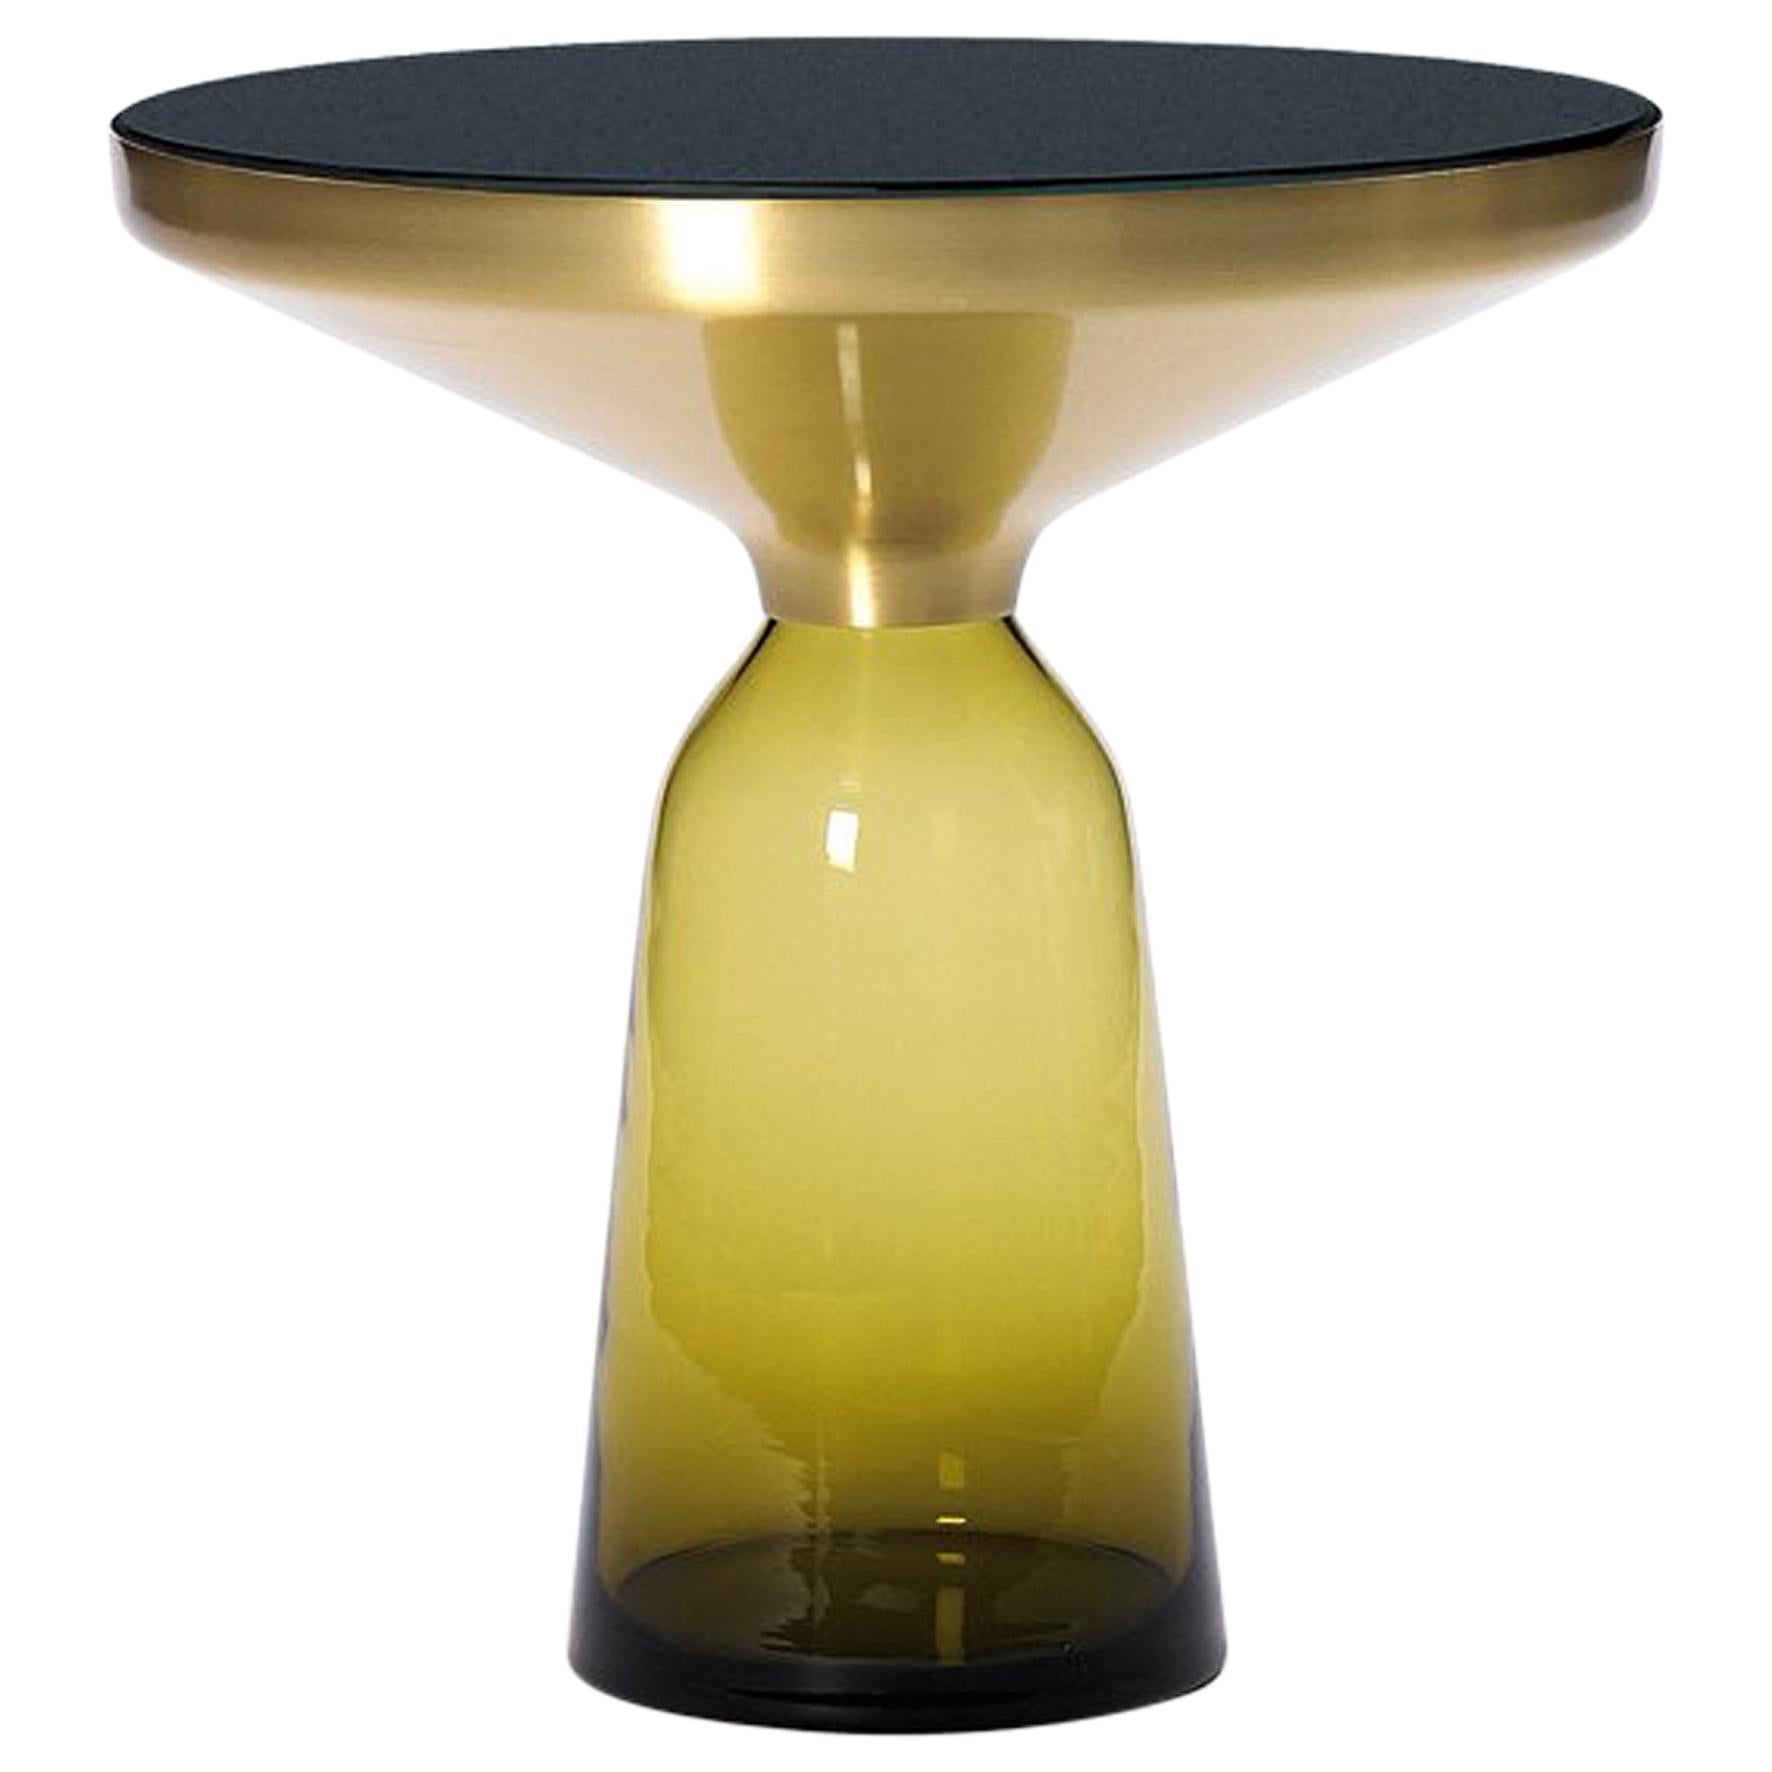 ClassiCon Bell Side Table in Brass and Topaz Yellow by Sebastian Herkner